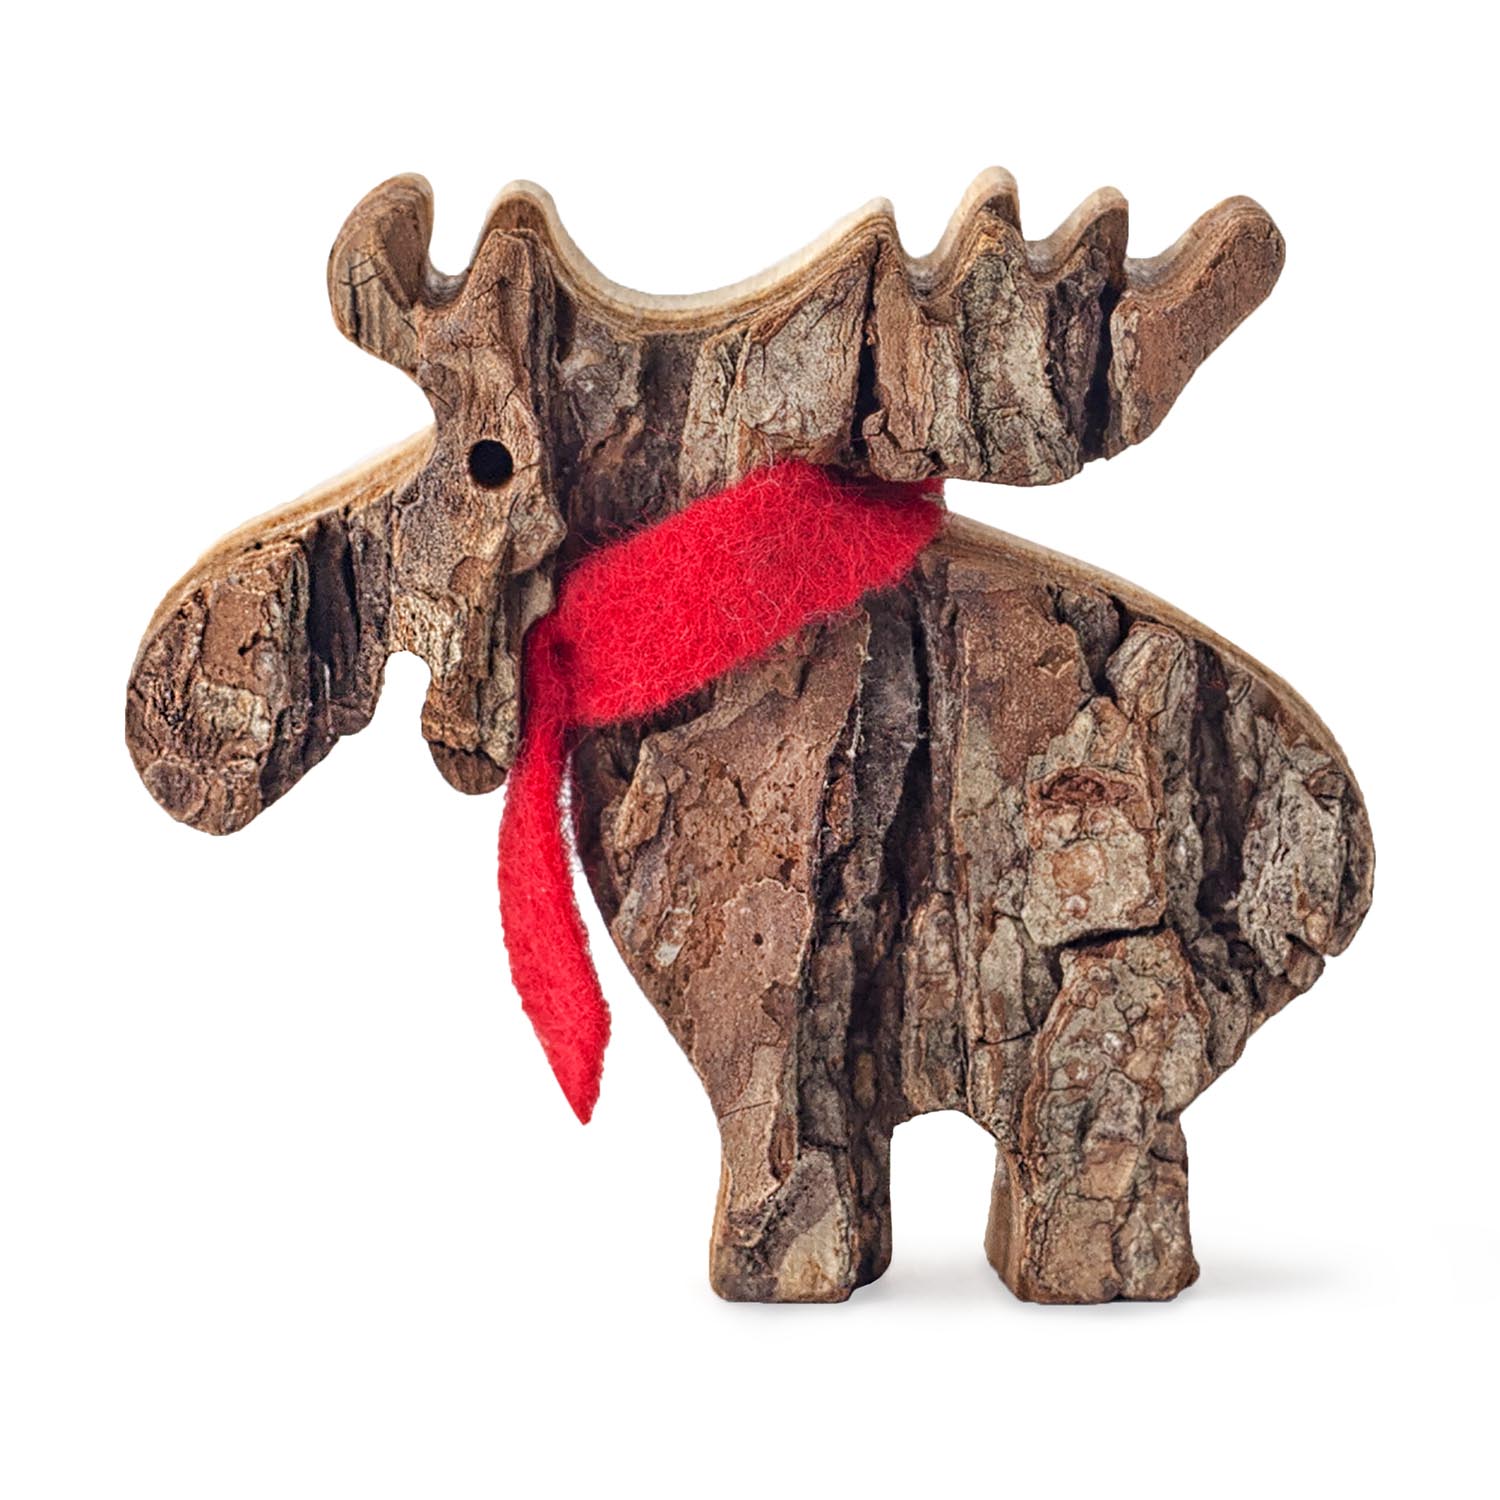 Rustic Wooden Decorative Animal Figurines - Forest Decor